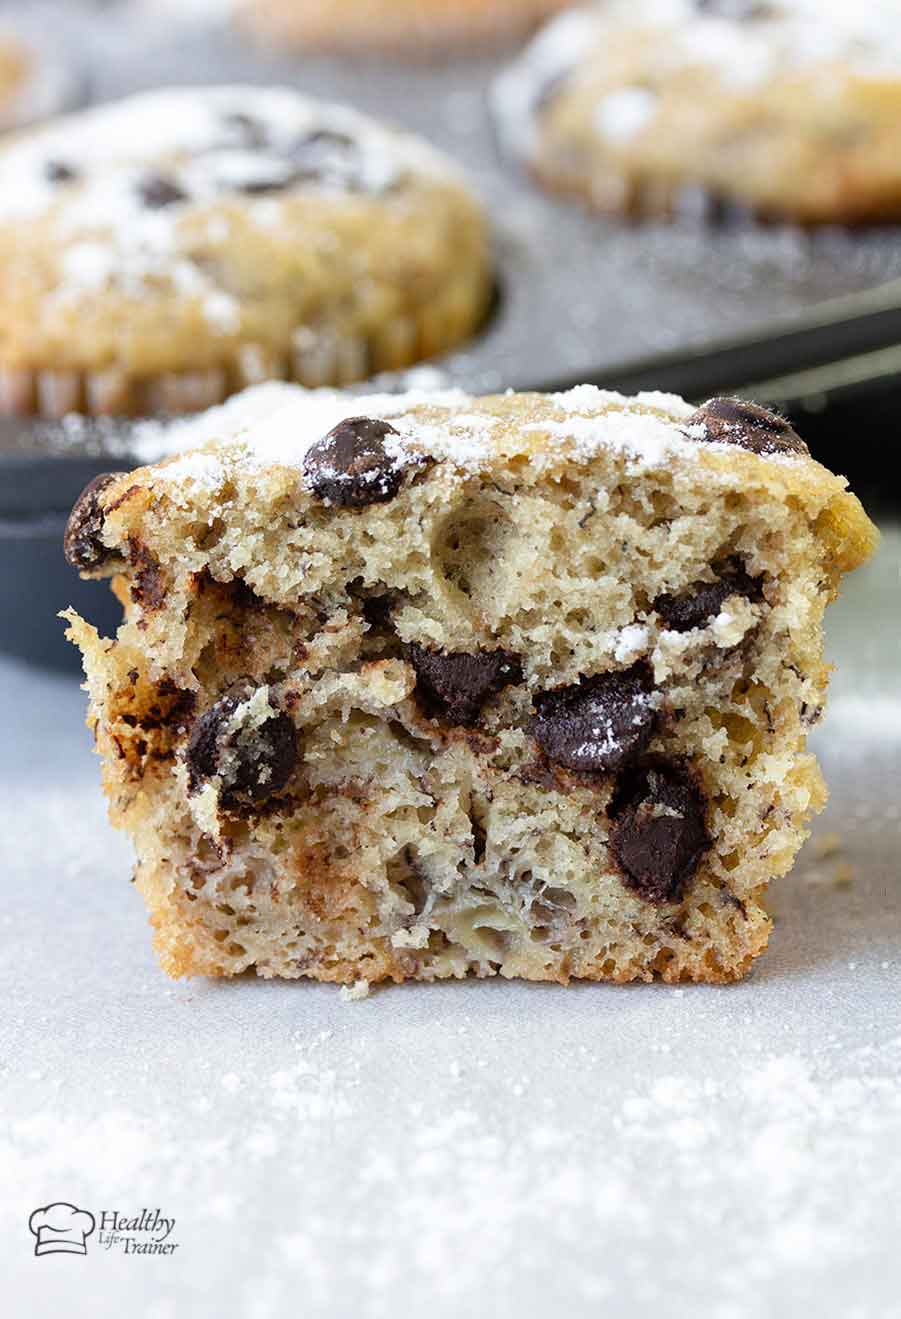 banana muffin cut into half showing the chocolate chips and the banana chunks.